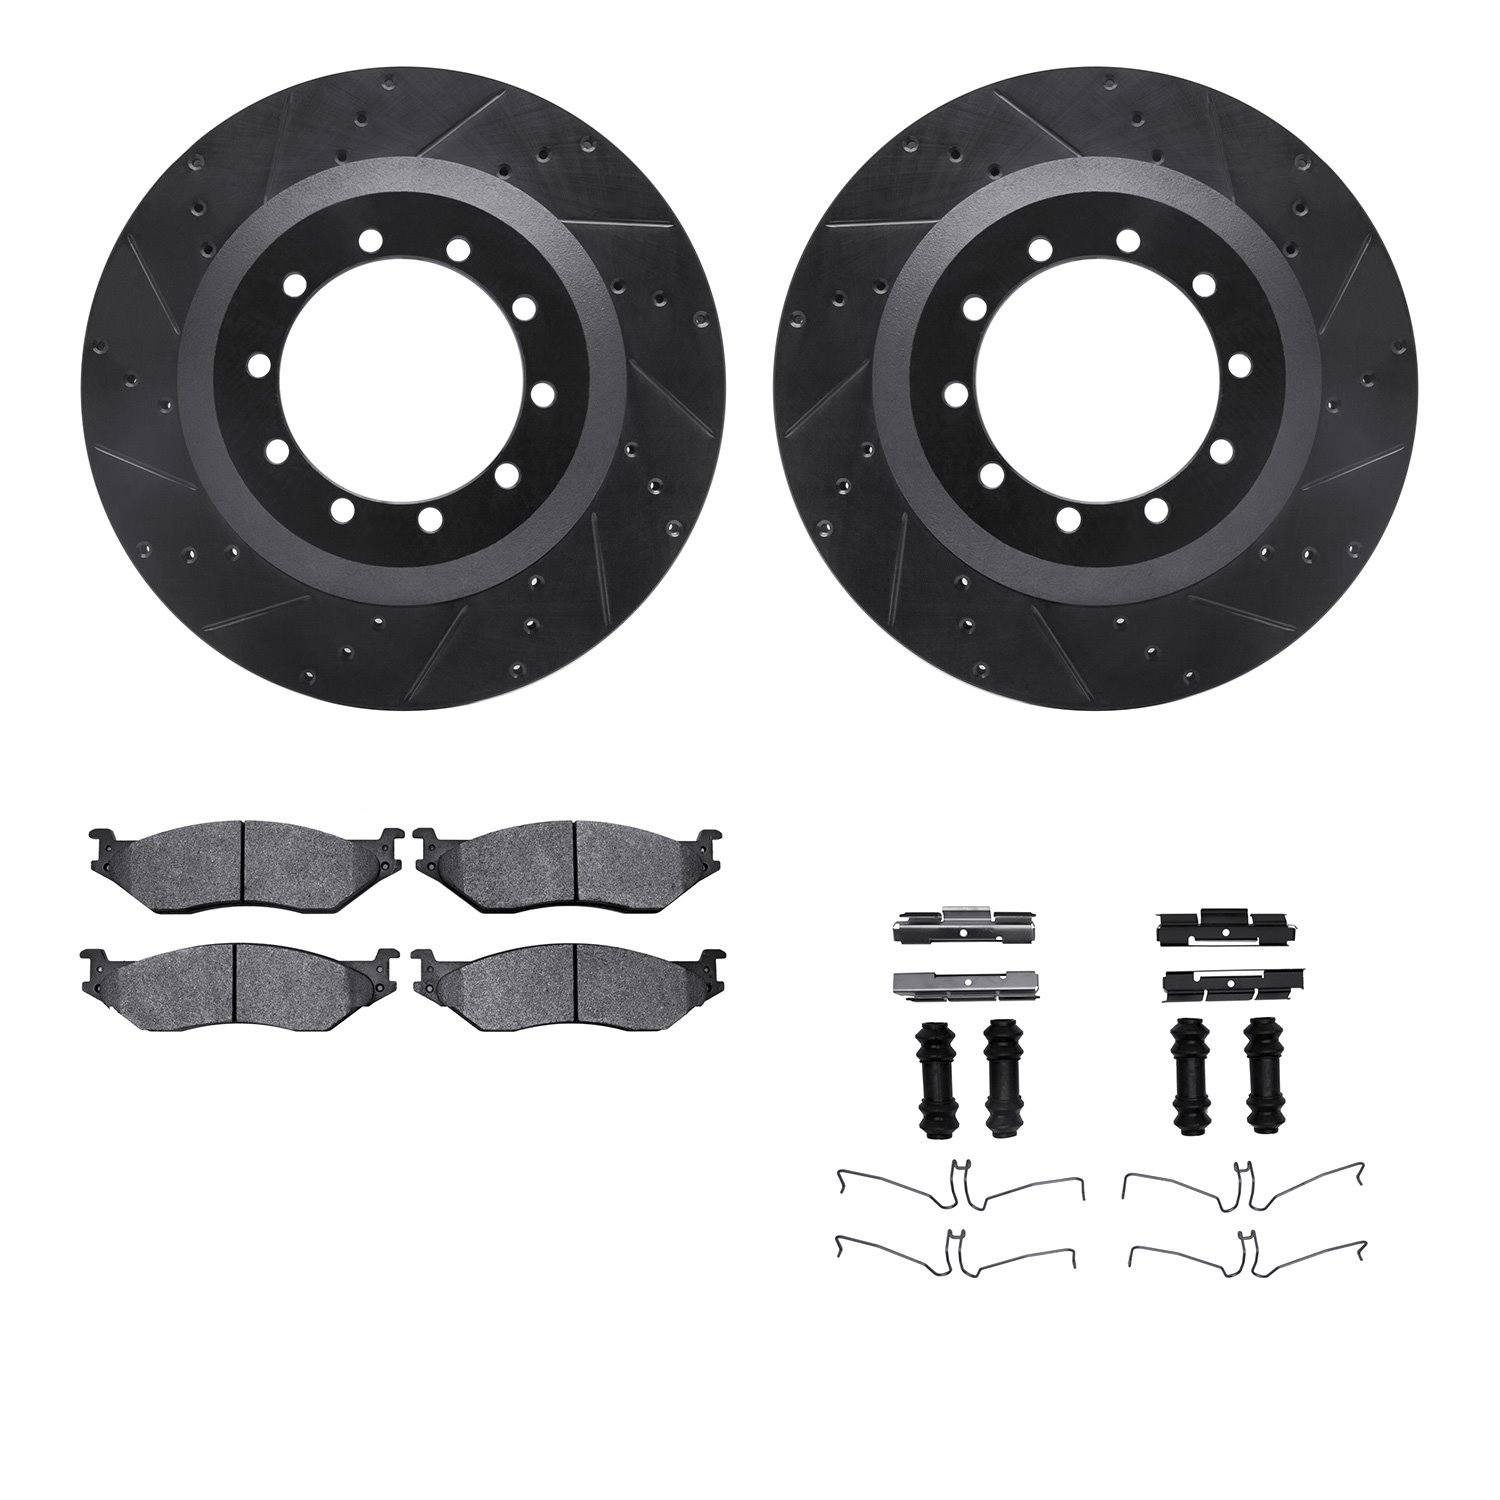 8412-54046 Drilled/Slotted Brake Rotors with Ultimate-Duty Brake Pads Kit & Hardware [Black], 2006-2019 Ford/Lincoln/Mercury/Maz